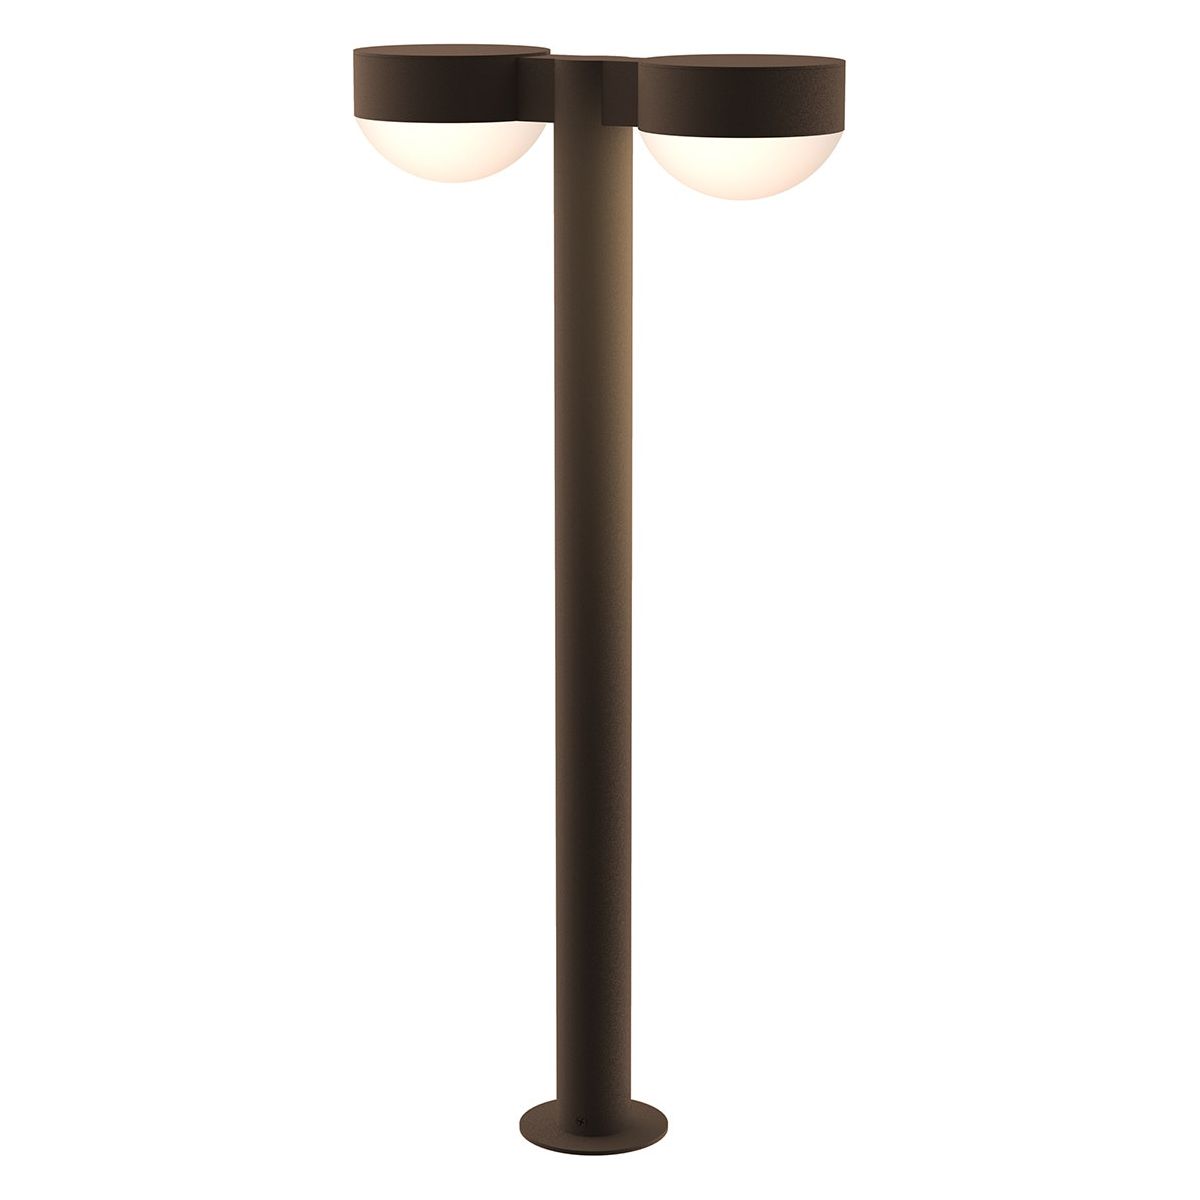 REALS 28" LED Double Bollard with Plate Cap and Dome Lens